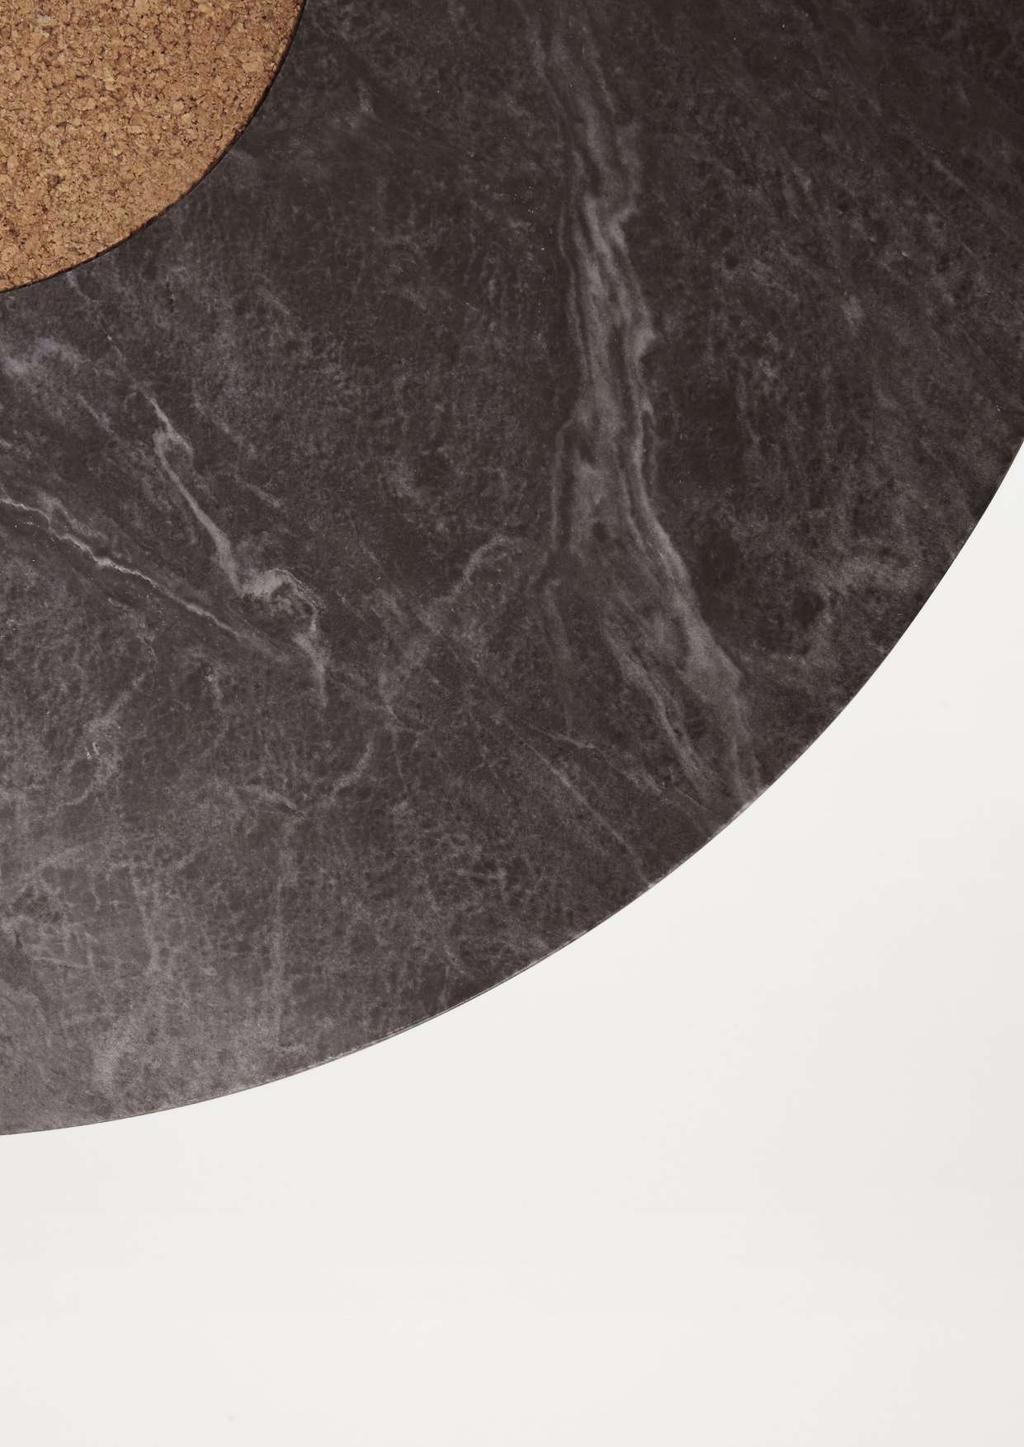 ø600 ø390 420 330 SINTRA Design Year 2011 Typology Collection Origin Material Top Material Base Assembly Nicholai Wiig-Hansen Side Table Signature Portugal Black marble (Ruivina), White marble